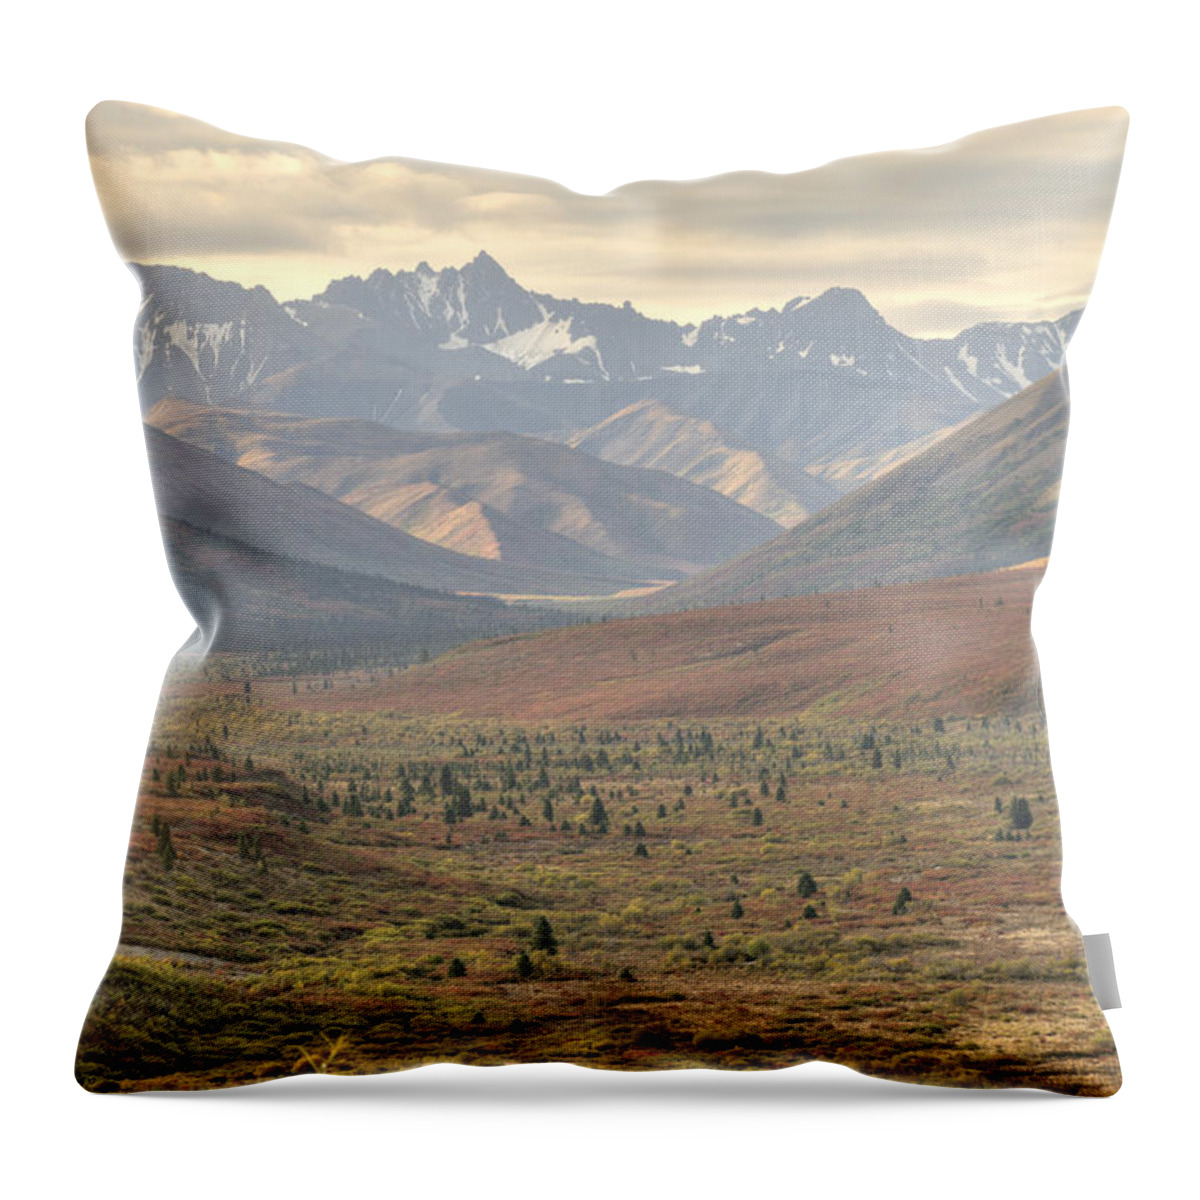 Mountains Throw Pillow featuring the photograph Denali Park Landscape 1 by David Drew